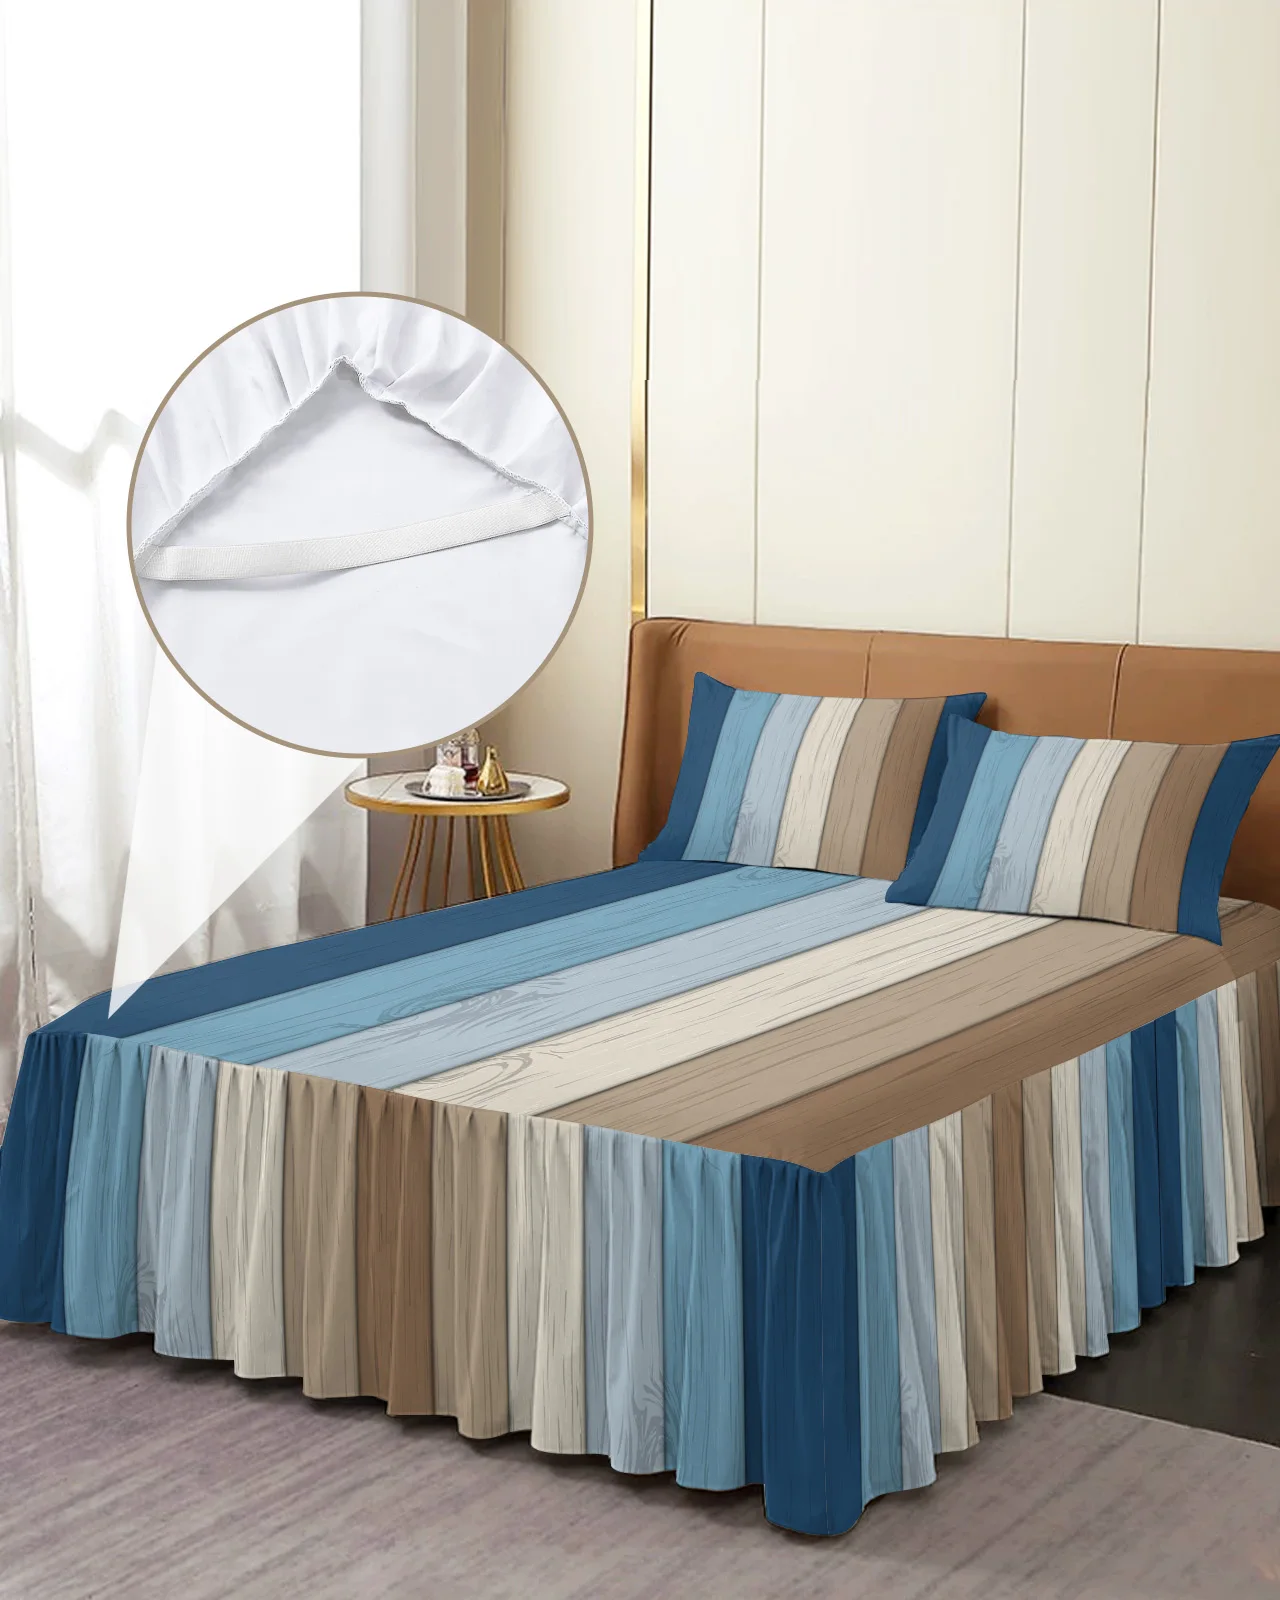 

Retro Gradient Wood Grain Bed Skirt Elastic Fitted Bedspread With Pillowcases Bed Protector Mattress Cover Bedding Set Bed Sheet